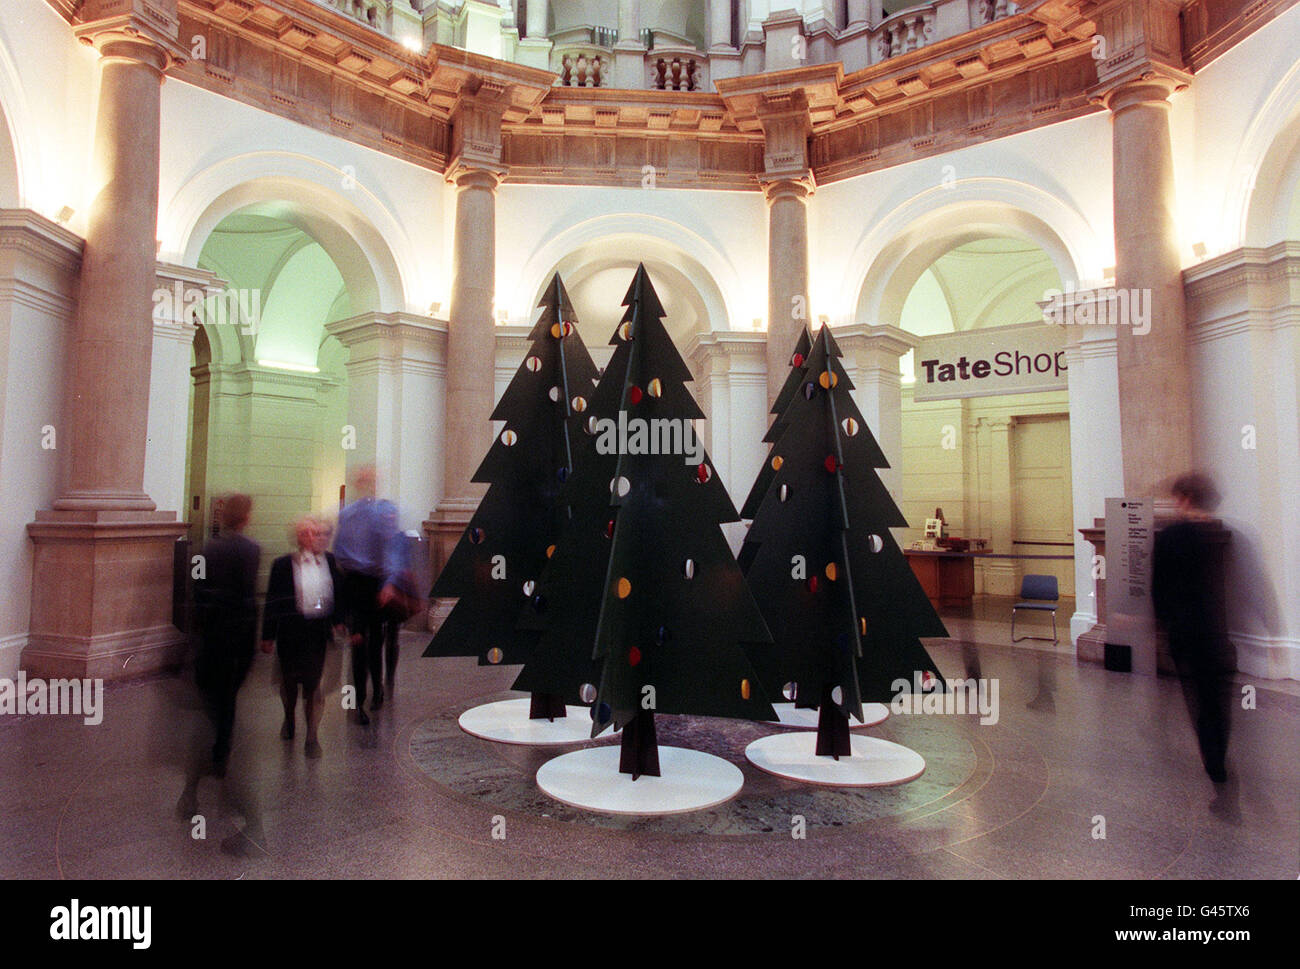 Members of the public view 'A Christmas Forest' designed by artist Julian Opie at the Tate Gallery in London today (Tue). The gallery has broken with tradition of having a single tree on display by showing the Xmas trees in the rotunda. Photo by Fiona Hanson/PA. Stock Photo